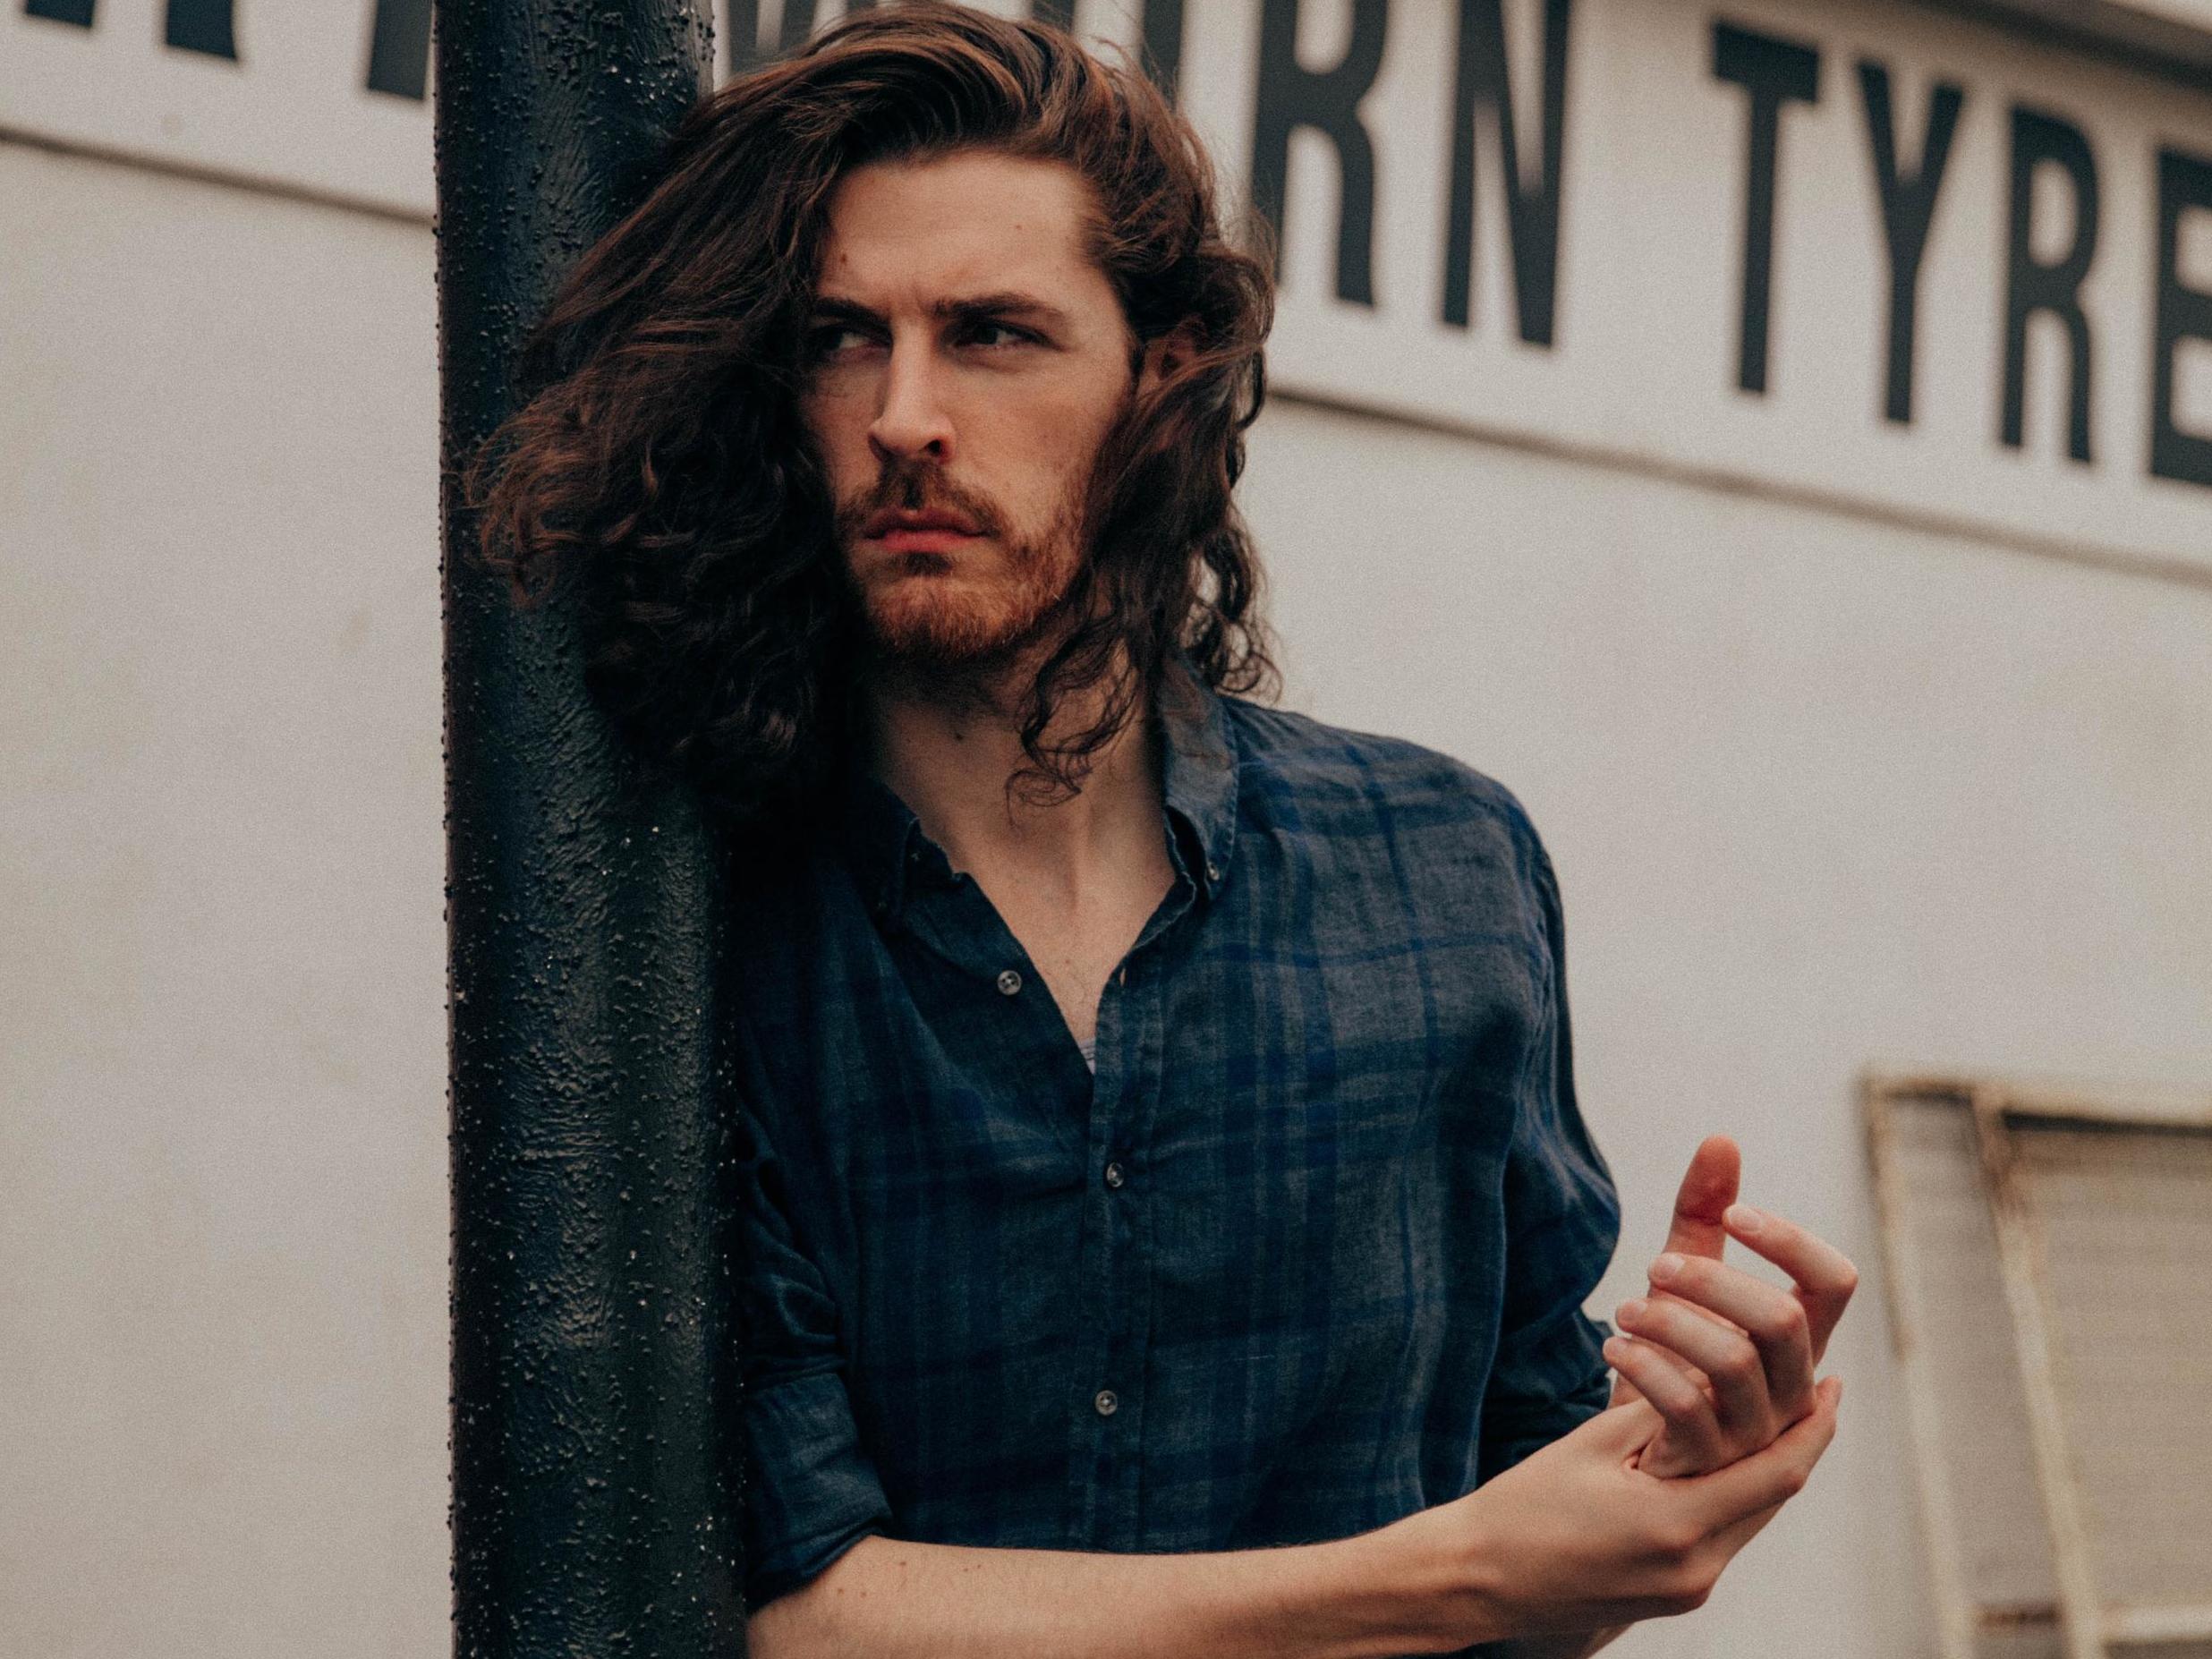 Andrew Hozier-Byrne is a bland preacher churning out soul